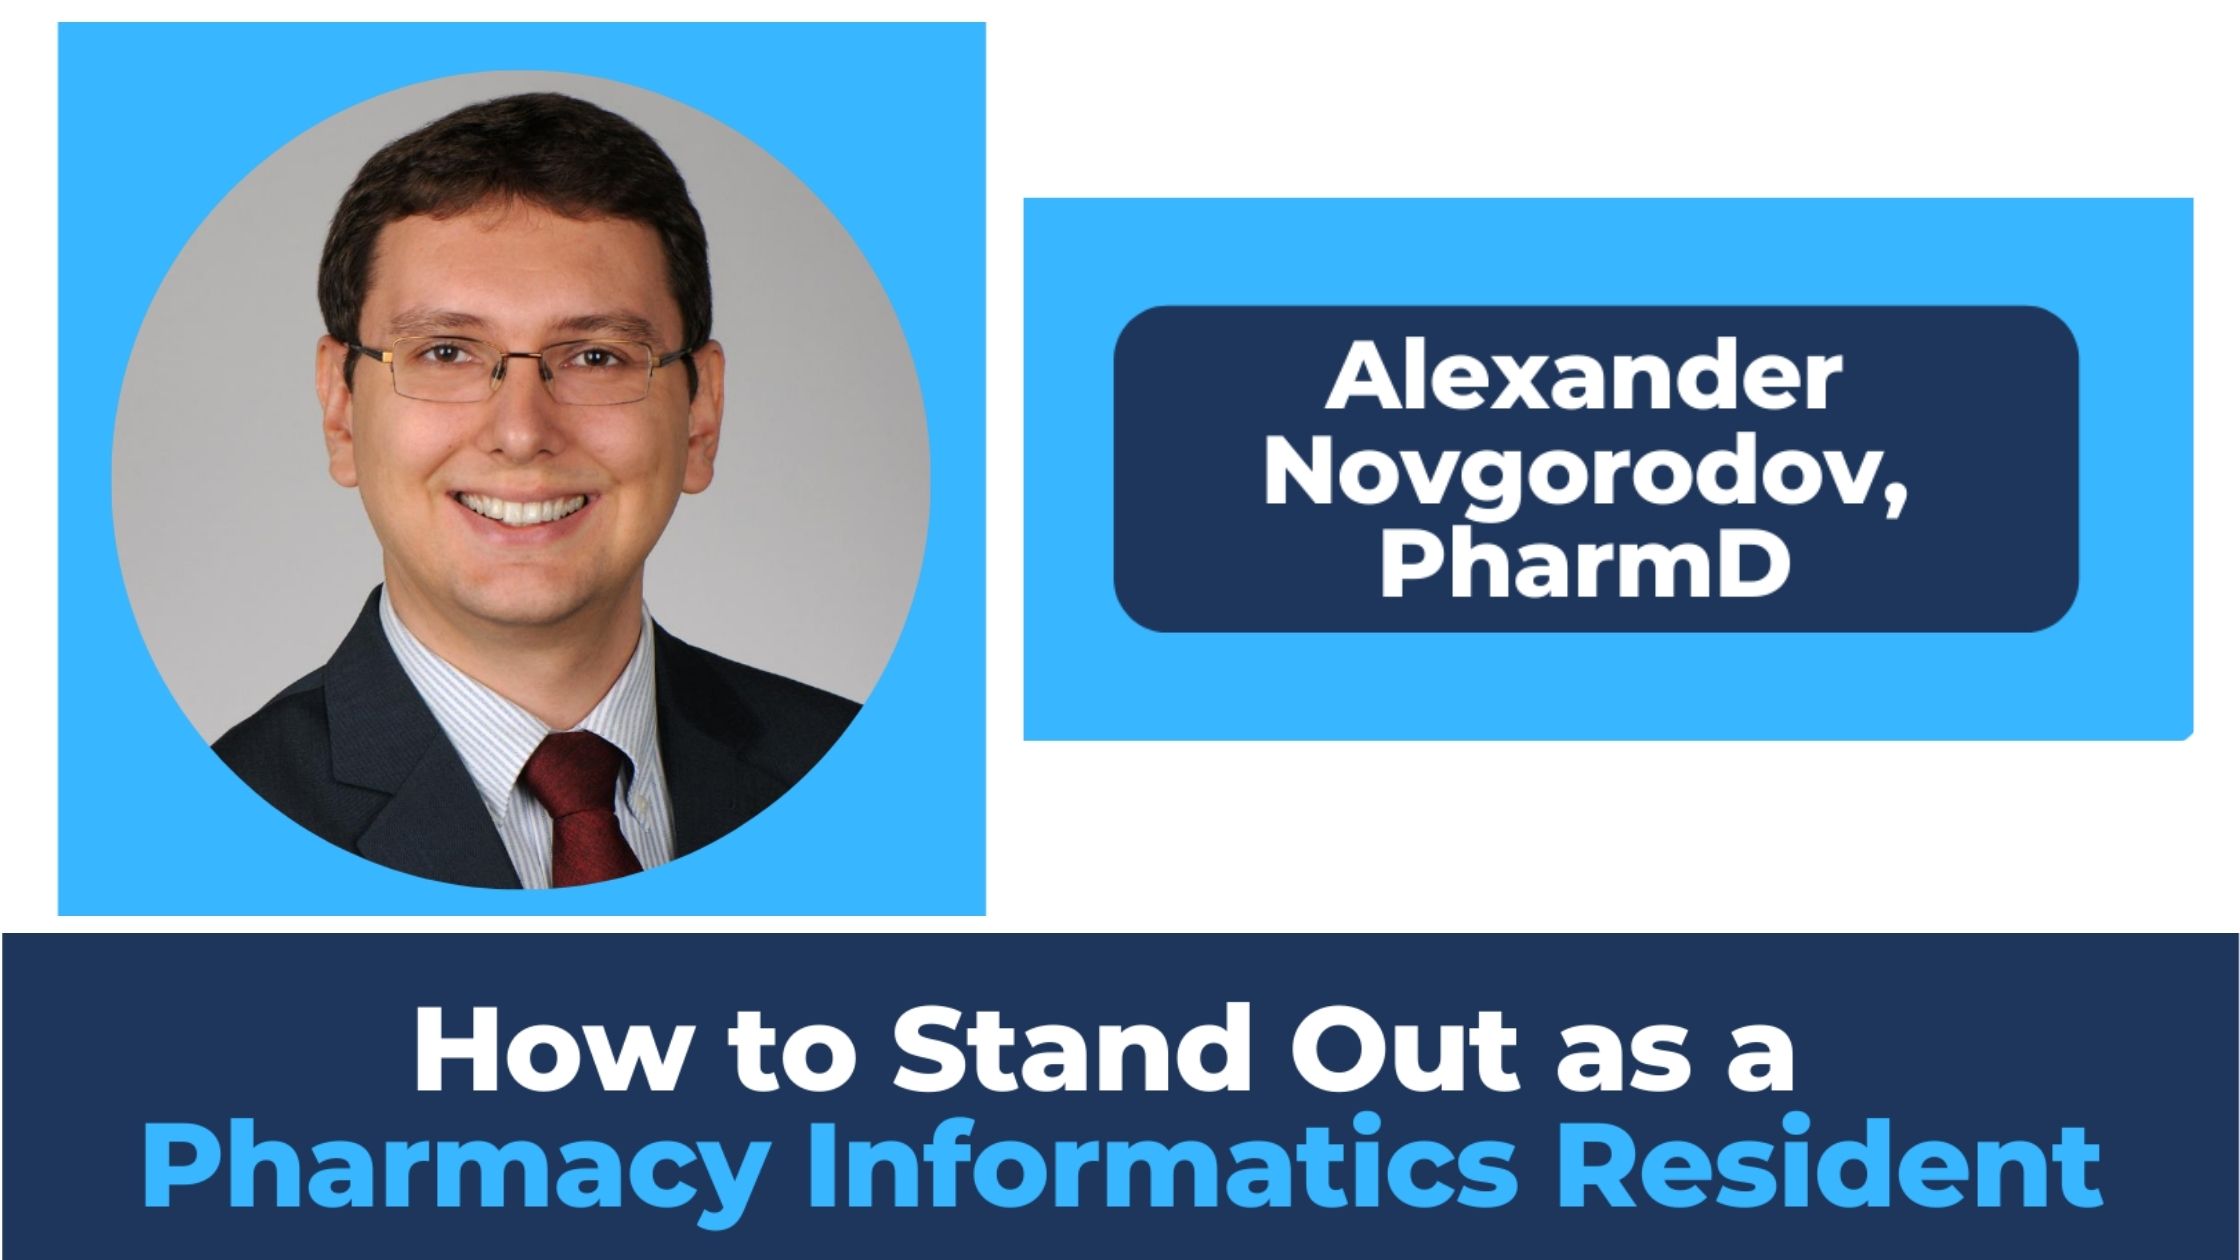 How to Stand Out as a Pharmacy Informatics Resident